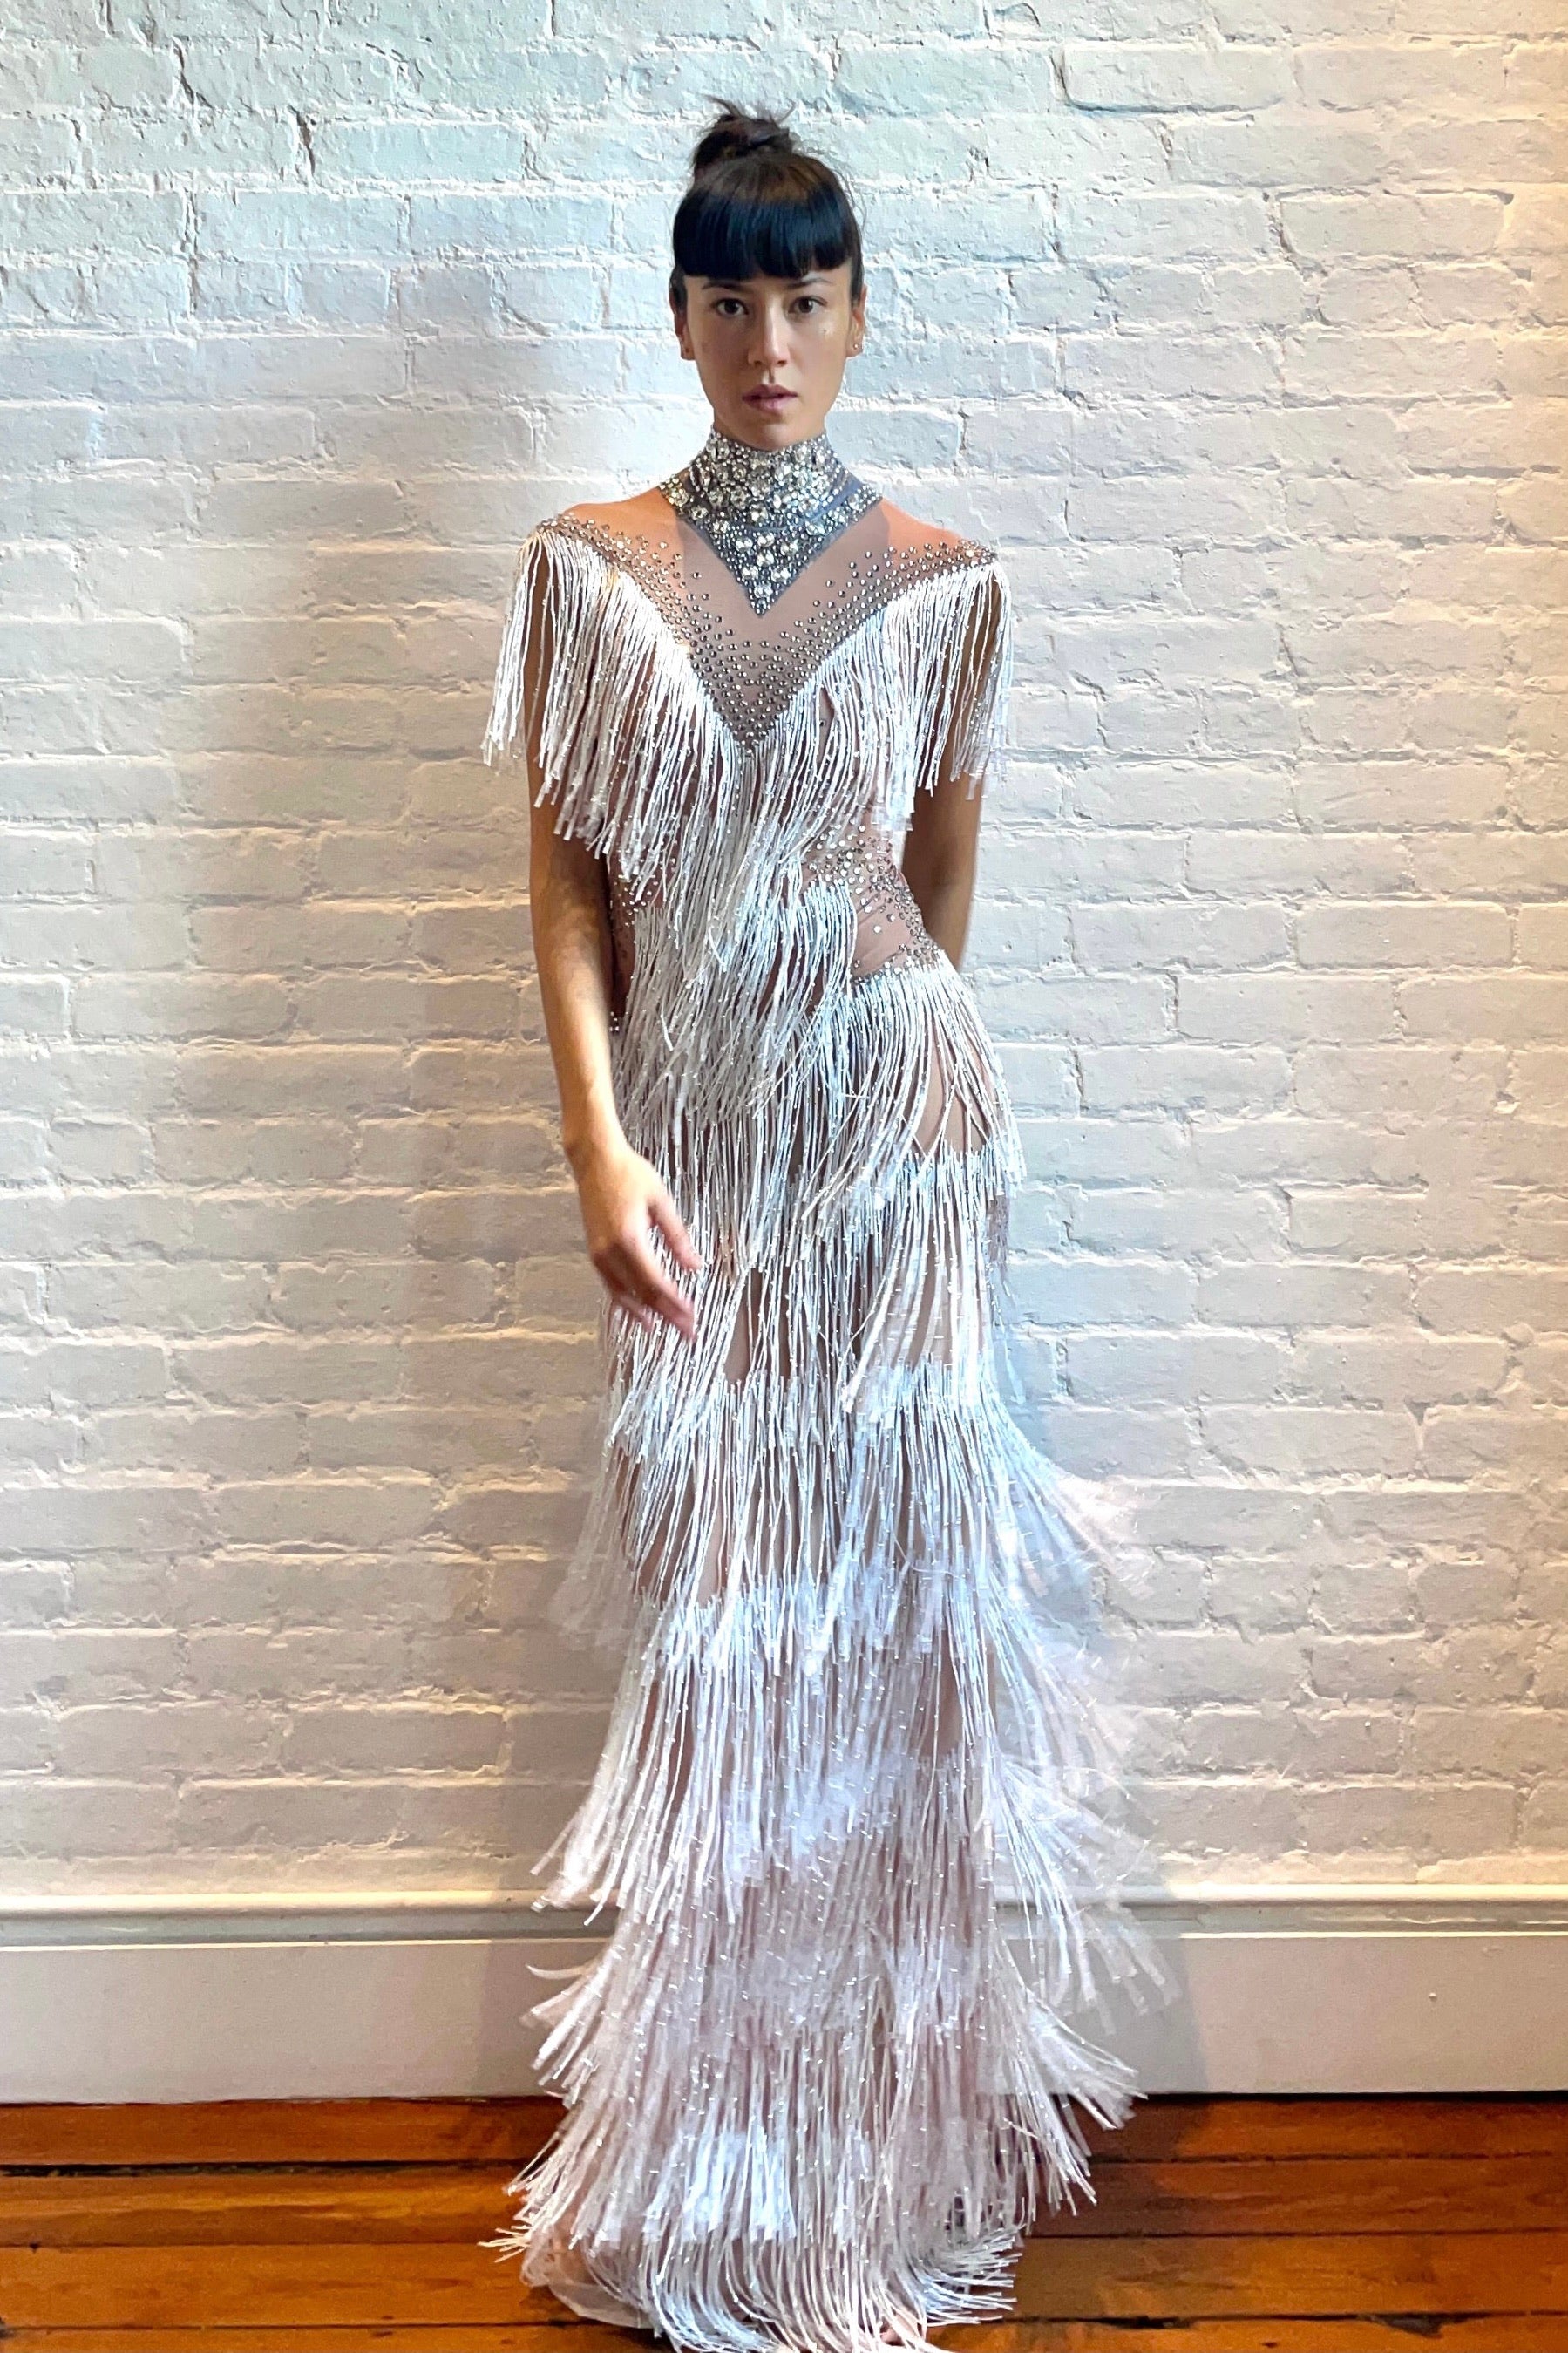 Fringe Gowns - Fringe Dance Gown for Performers | CHARISMATICO